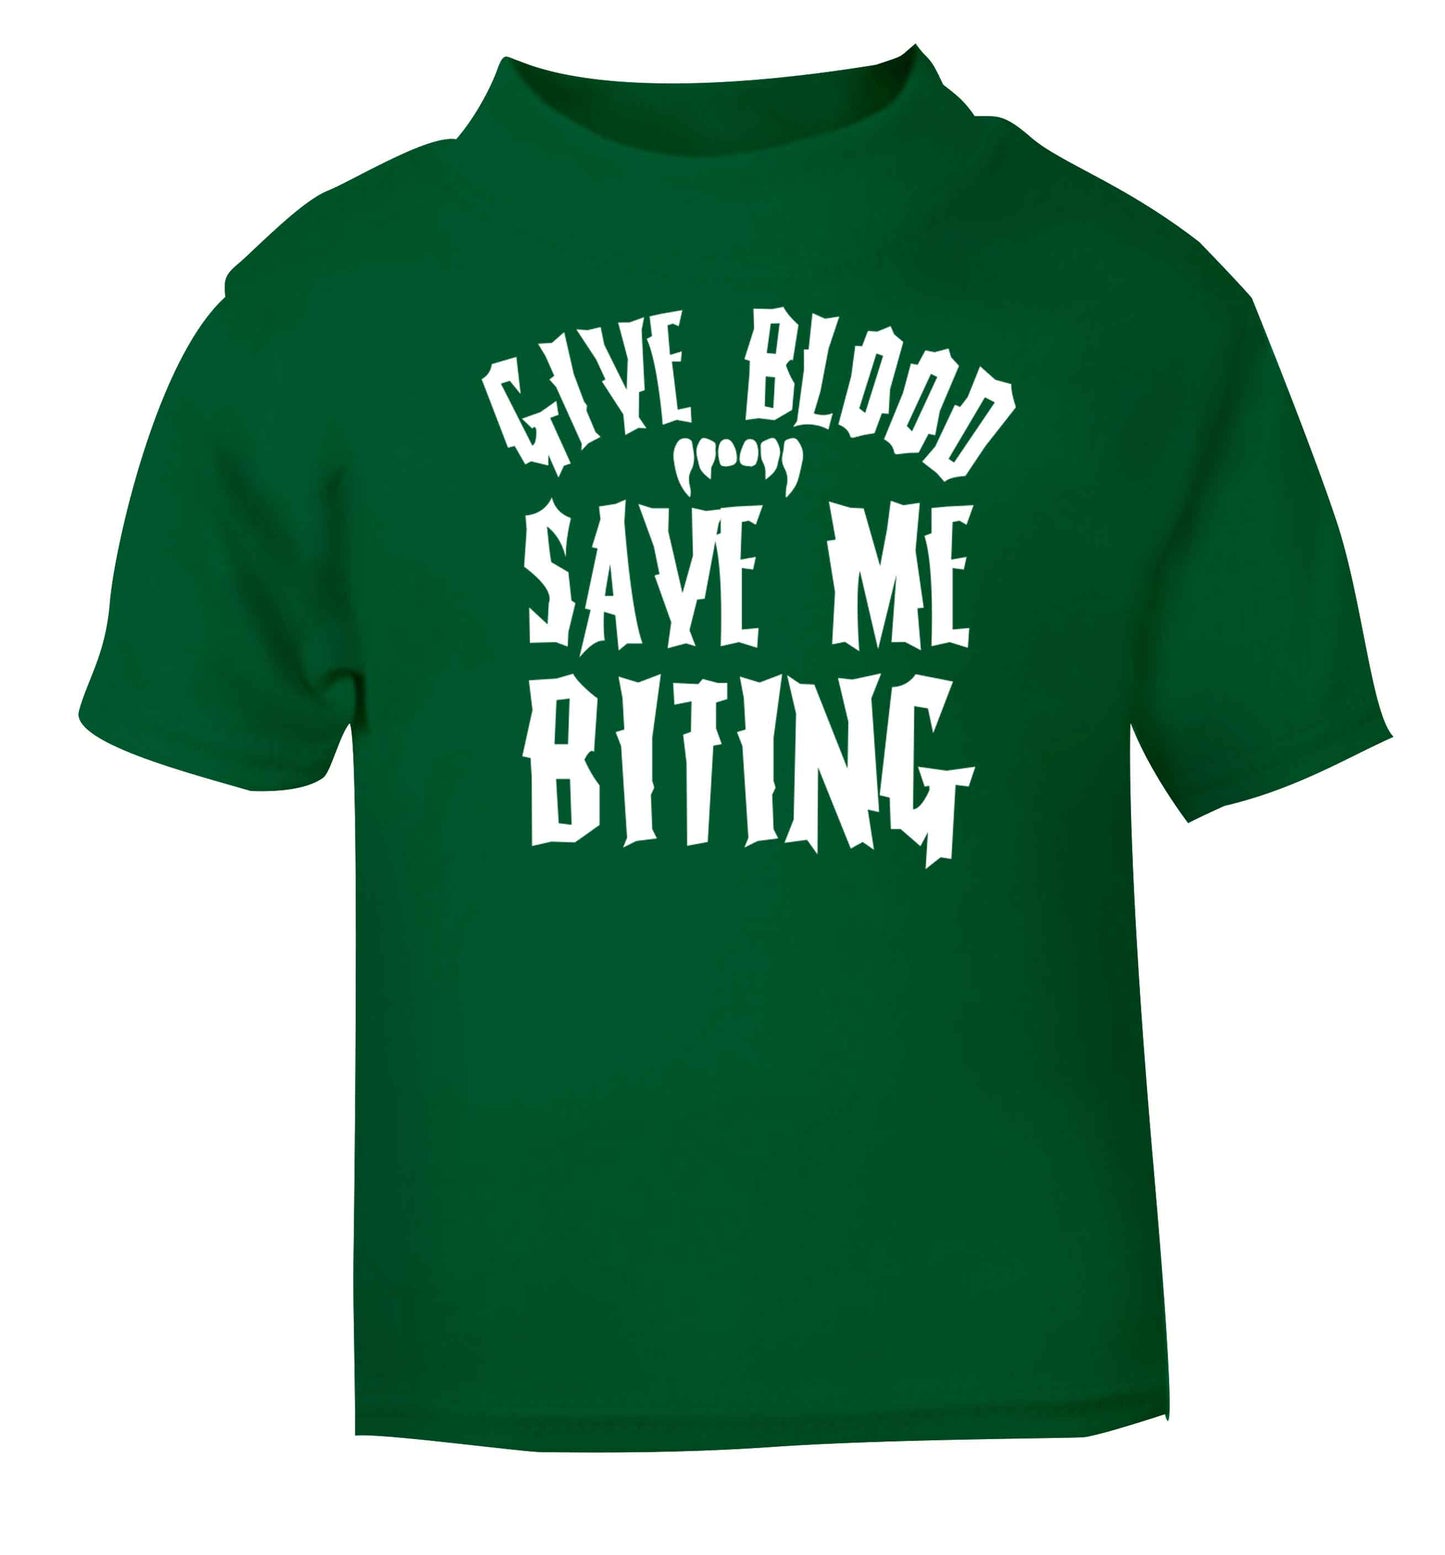 Give blood save me biting green baby toddler Tshirt 2 Years